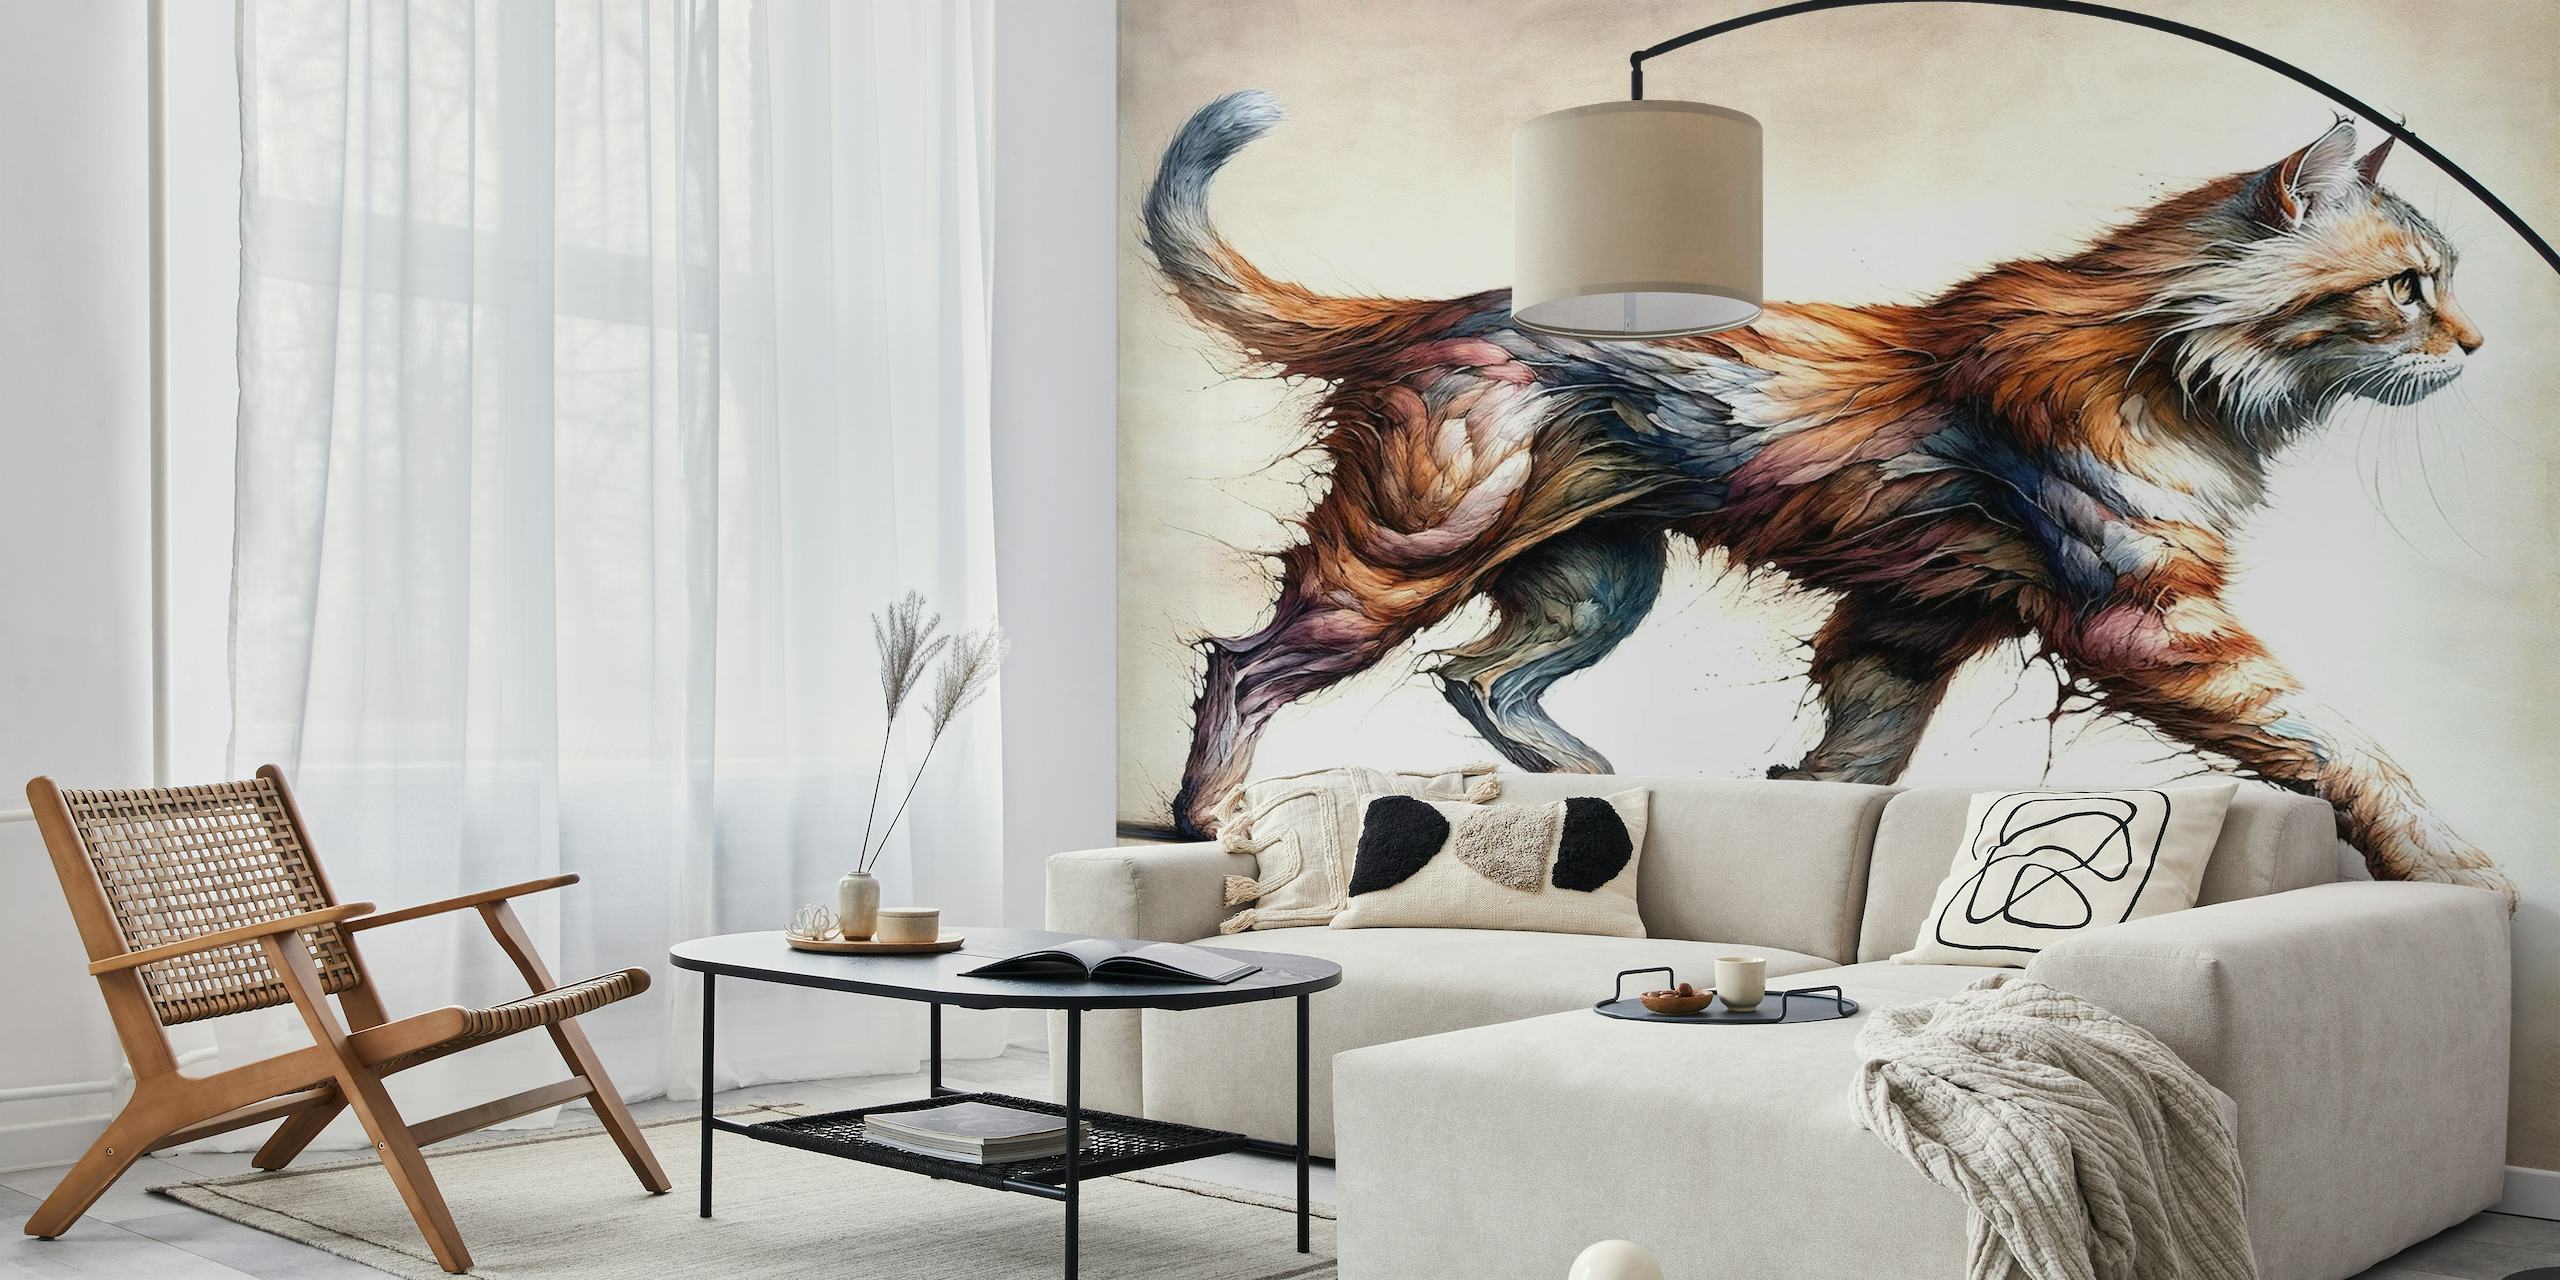 Artistic wall mural of a powerful cat in mid-stride